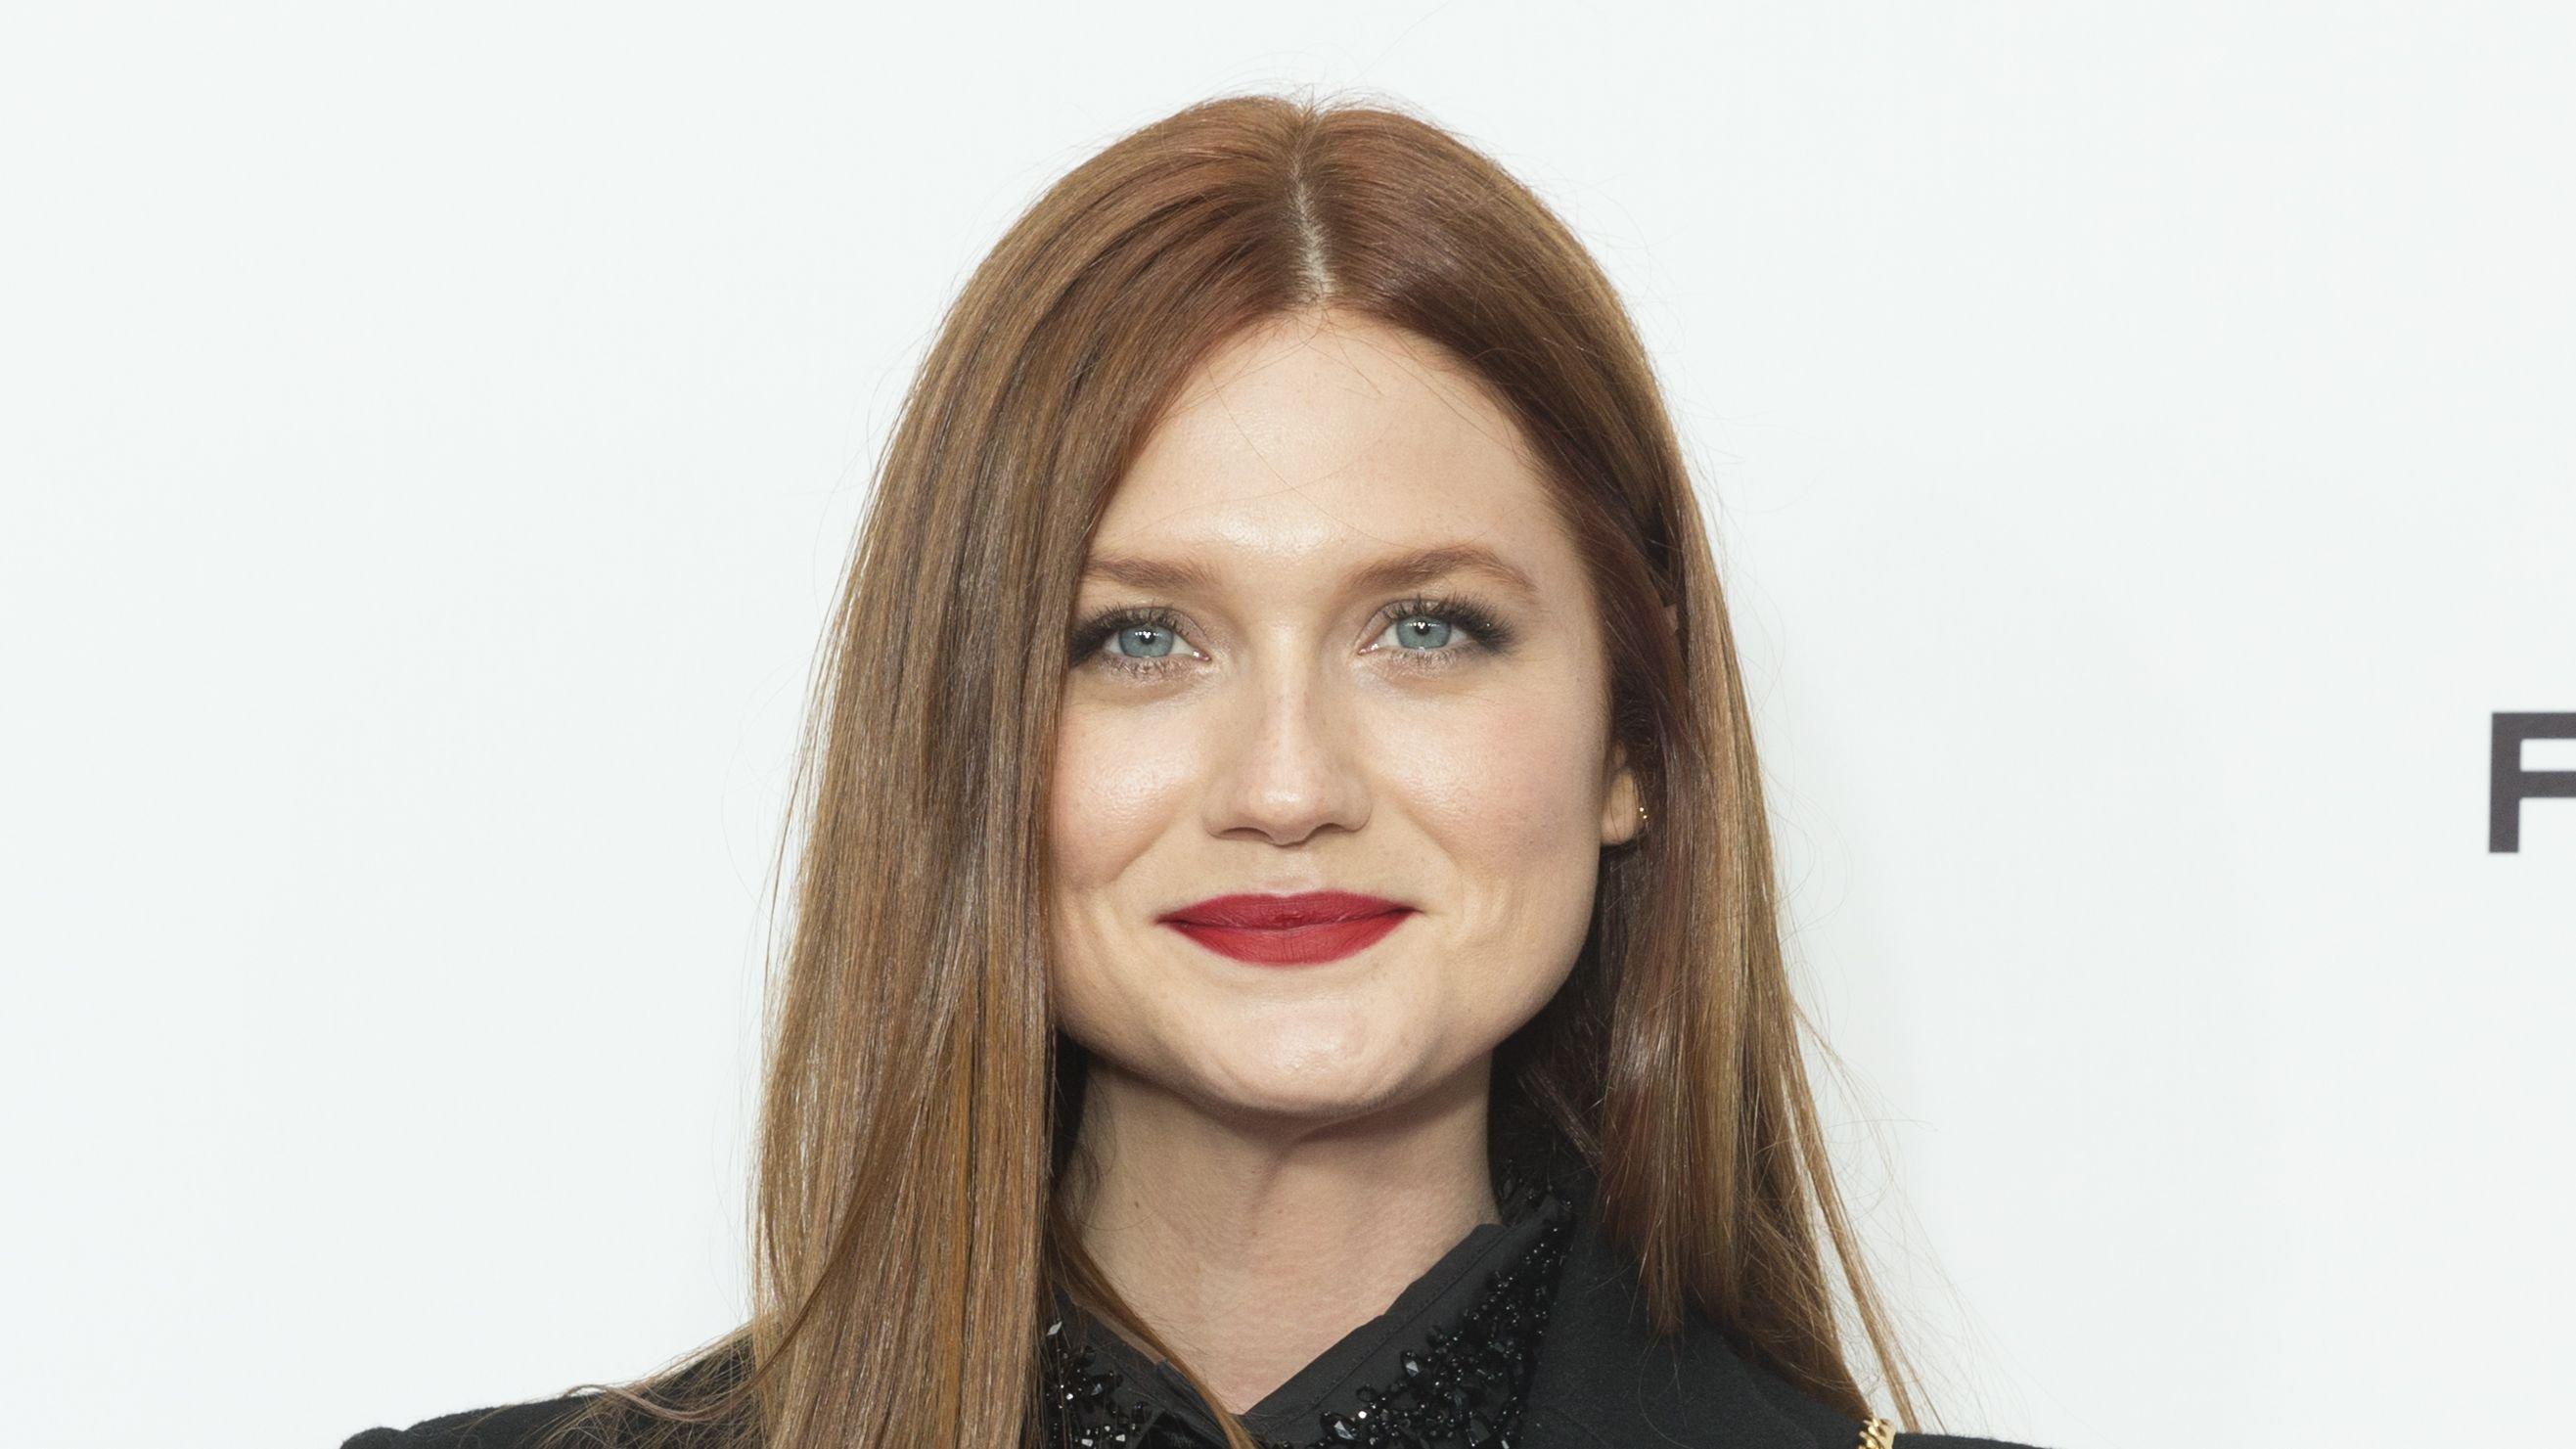 Actress and filmmaker Bonnie Wright